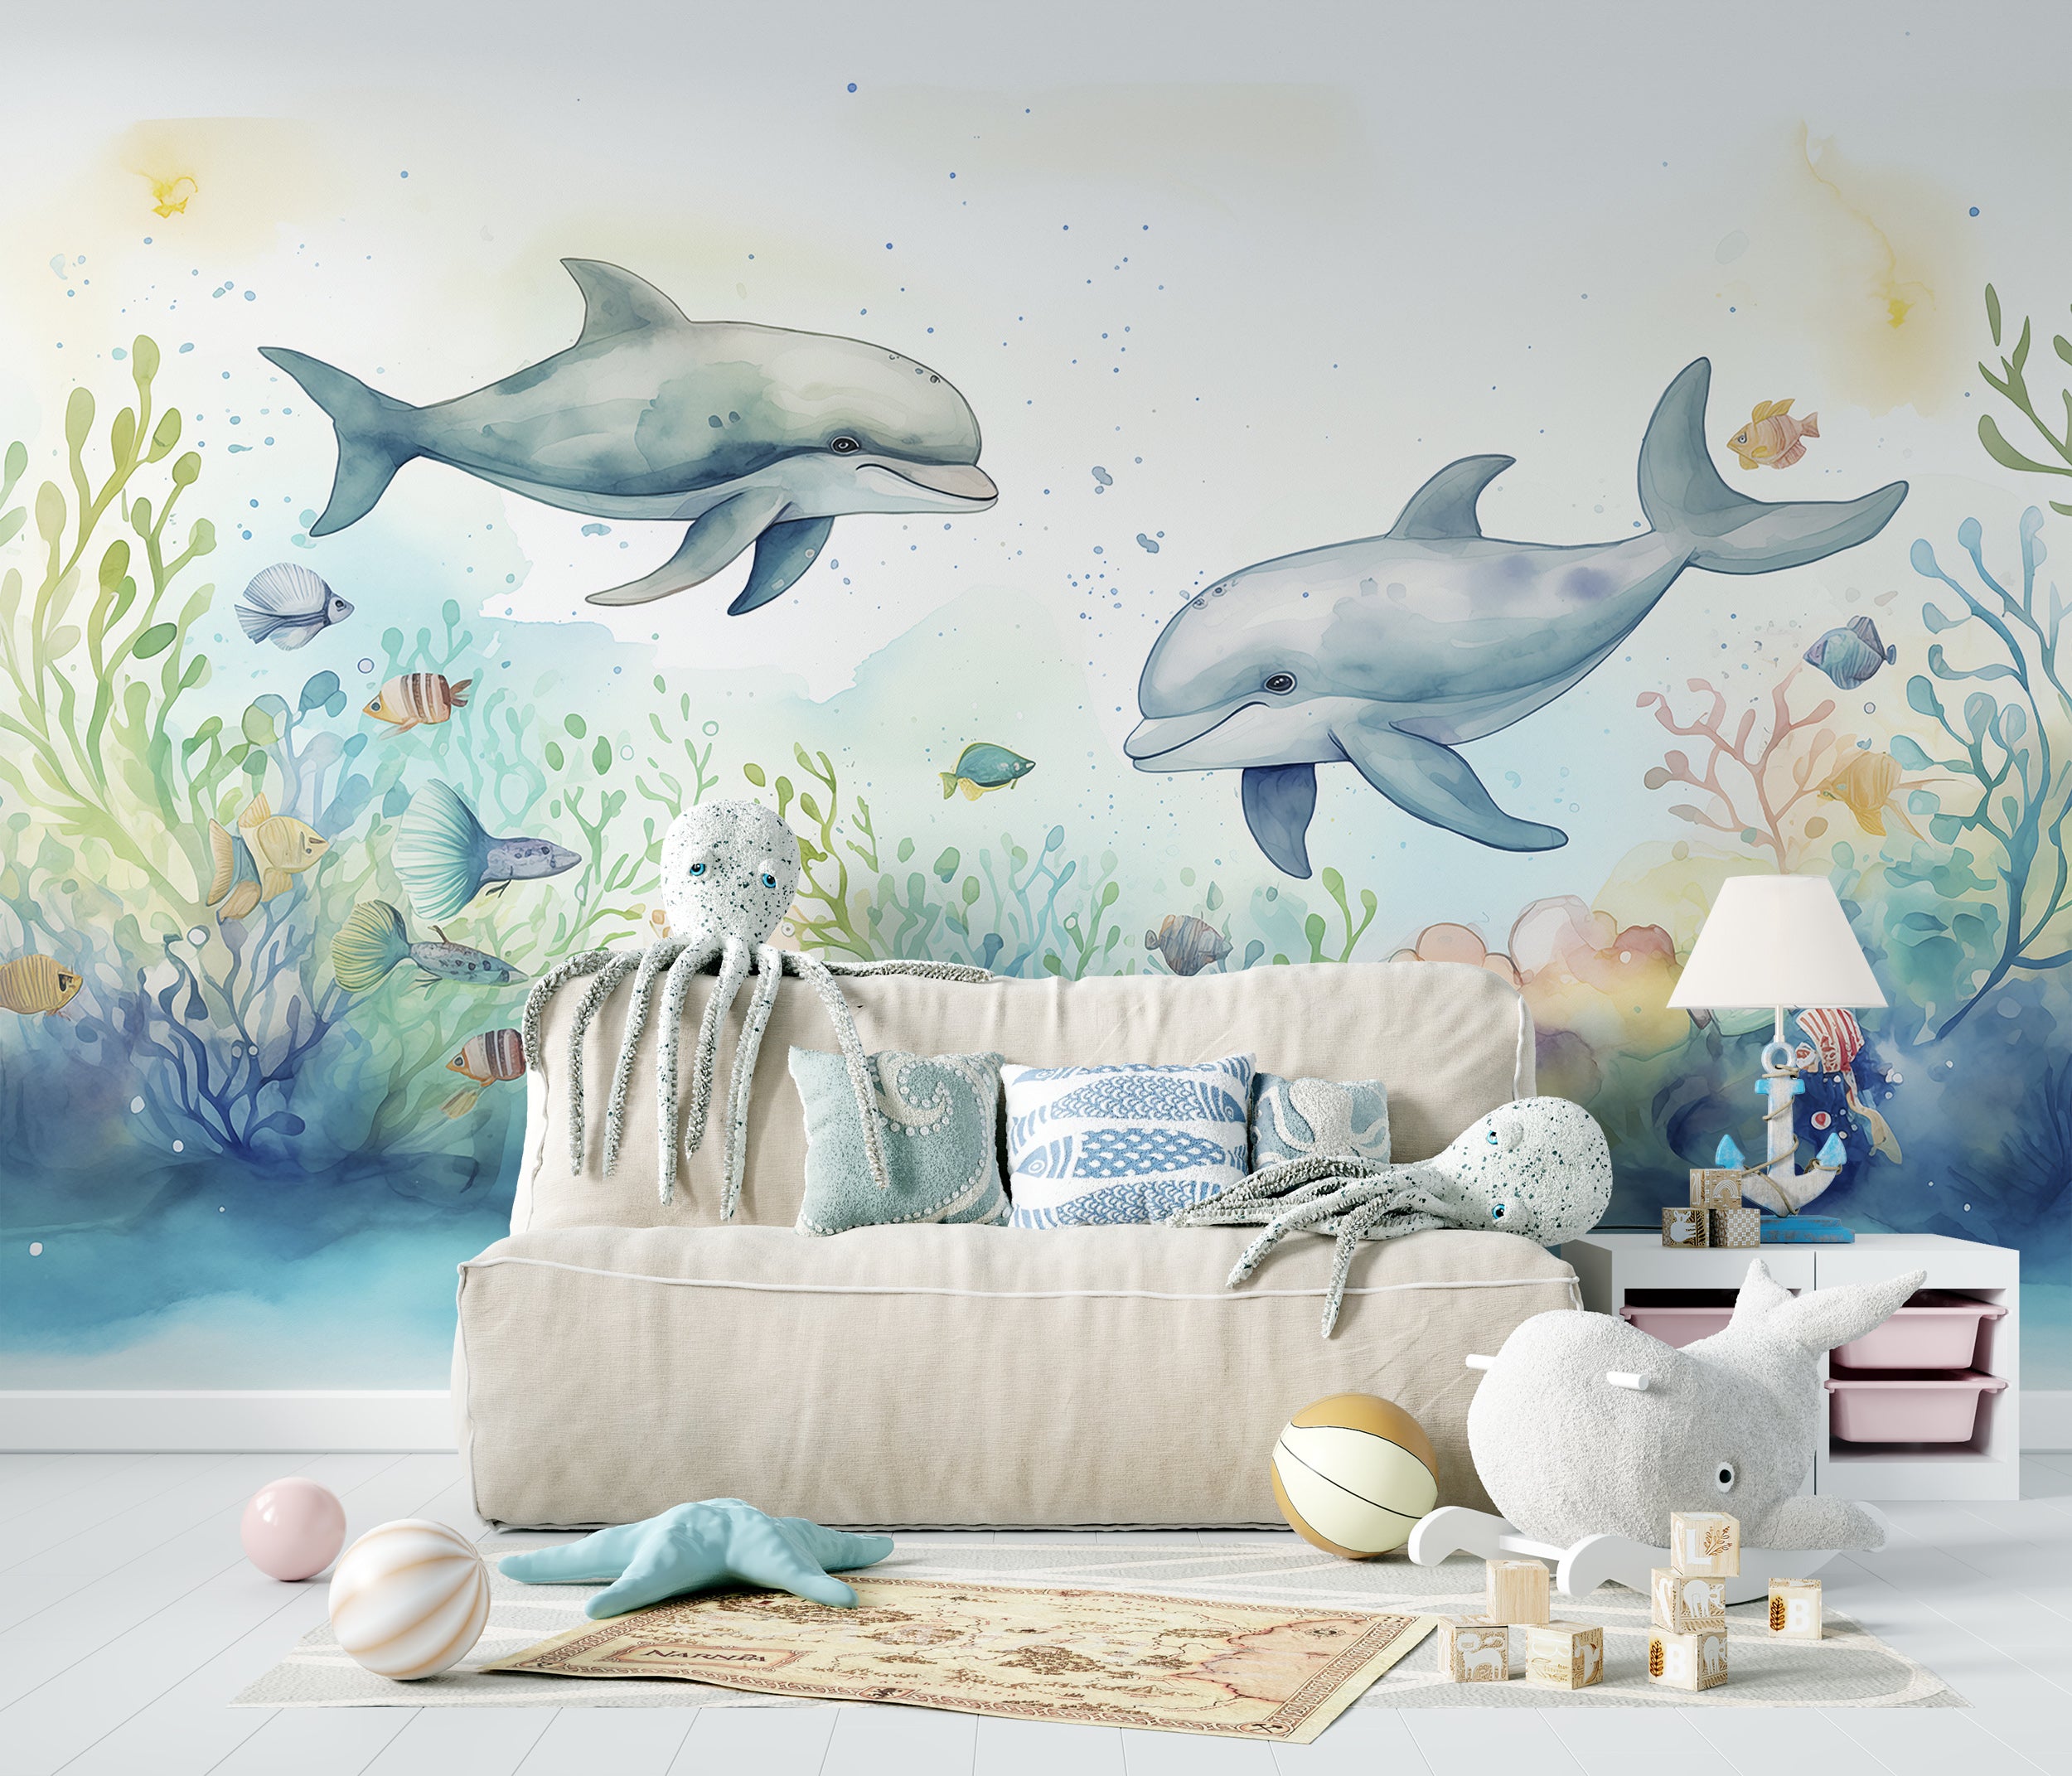 Underwater Life Wall Decal for Nursery